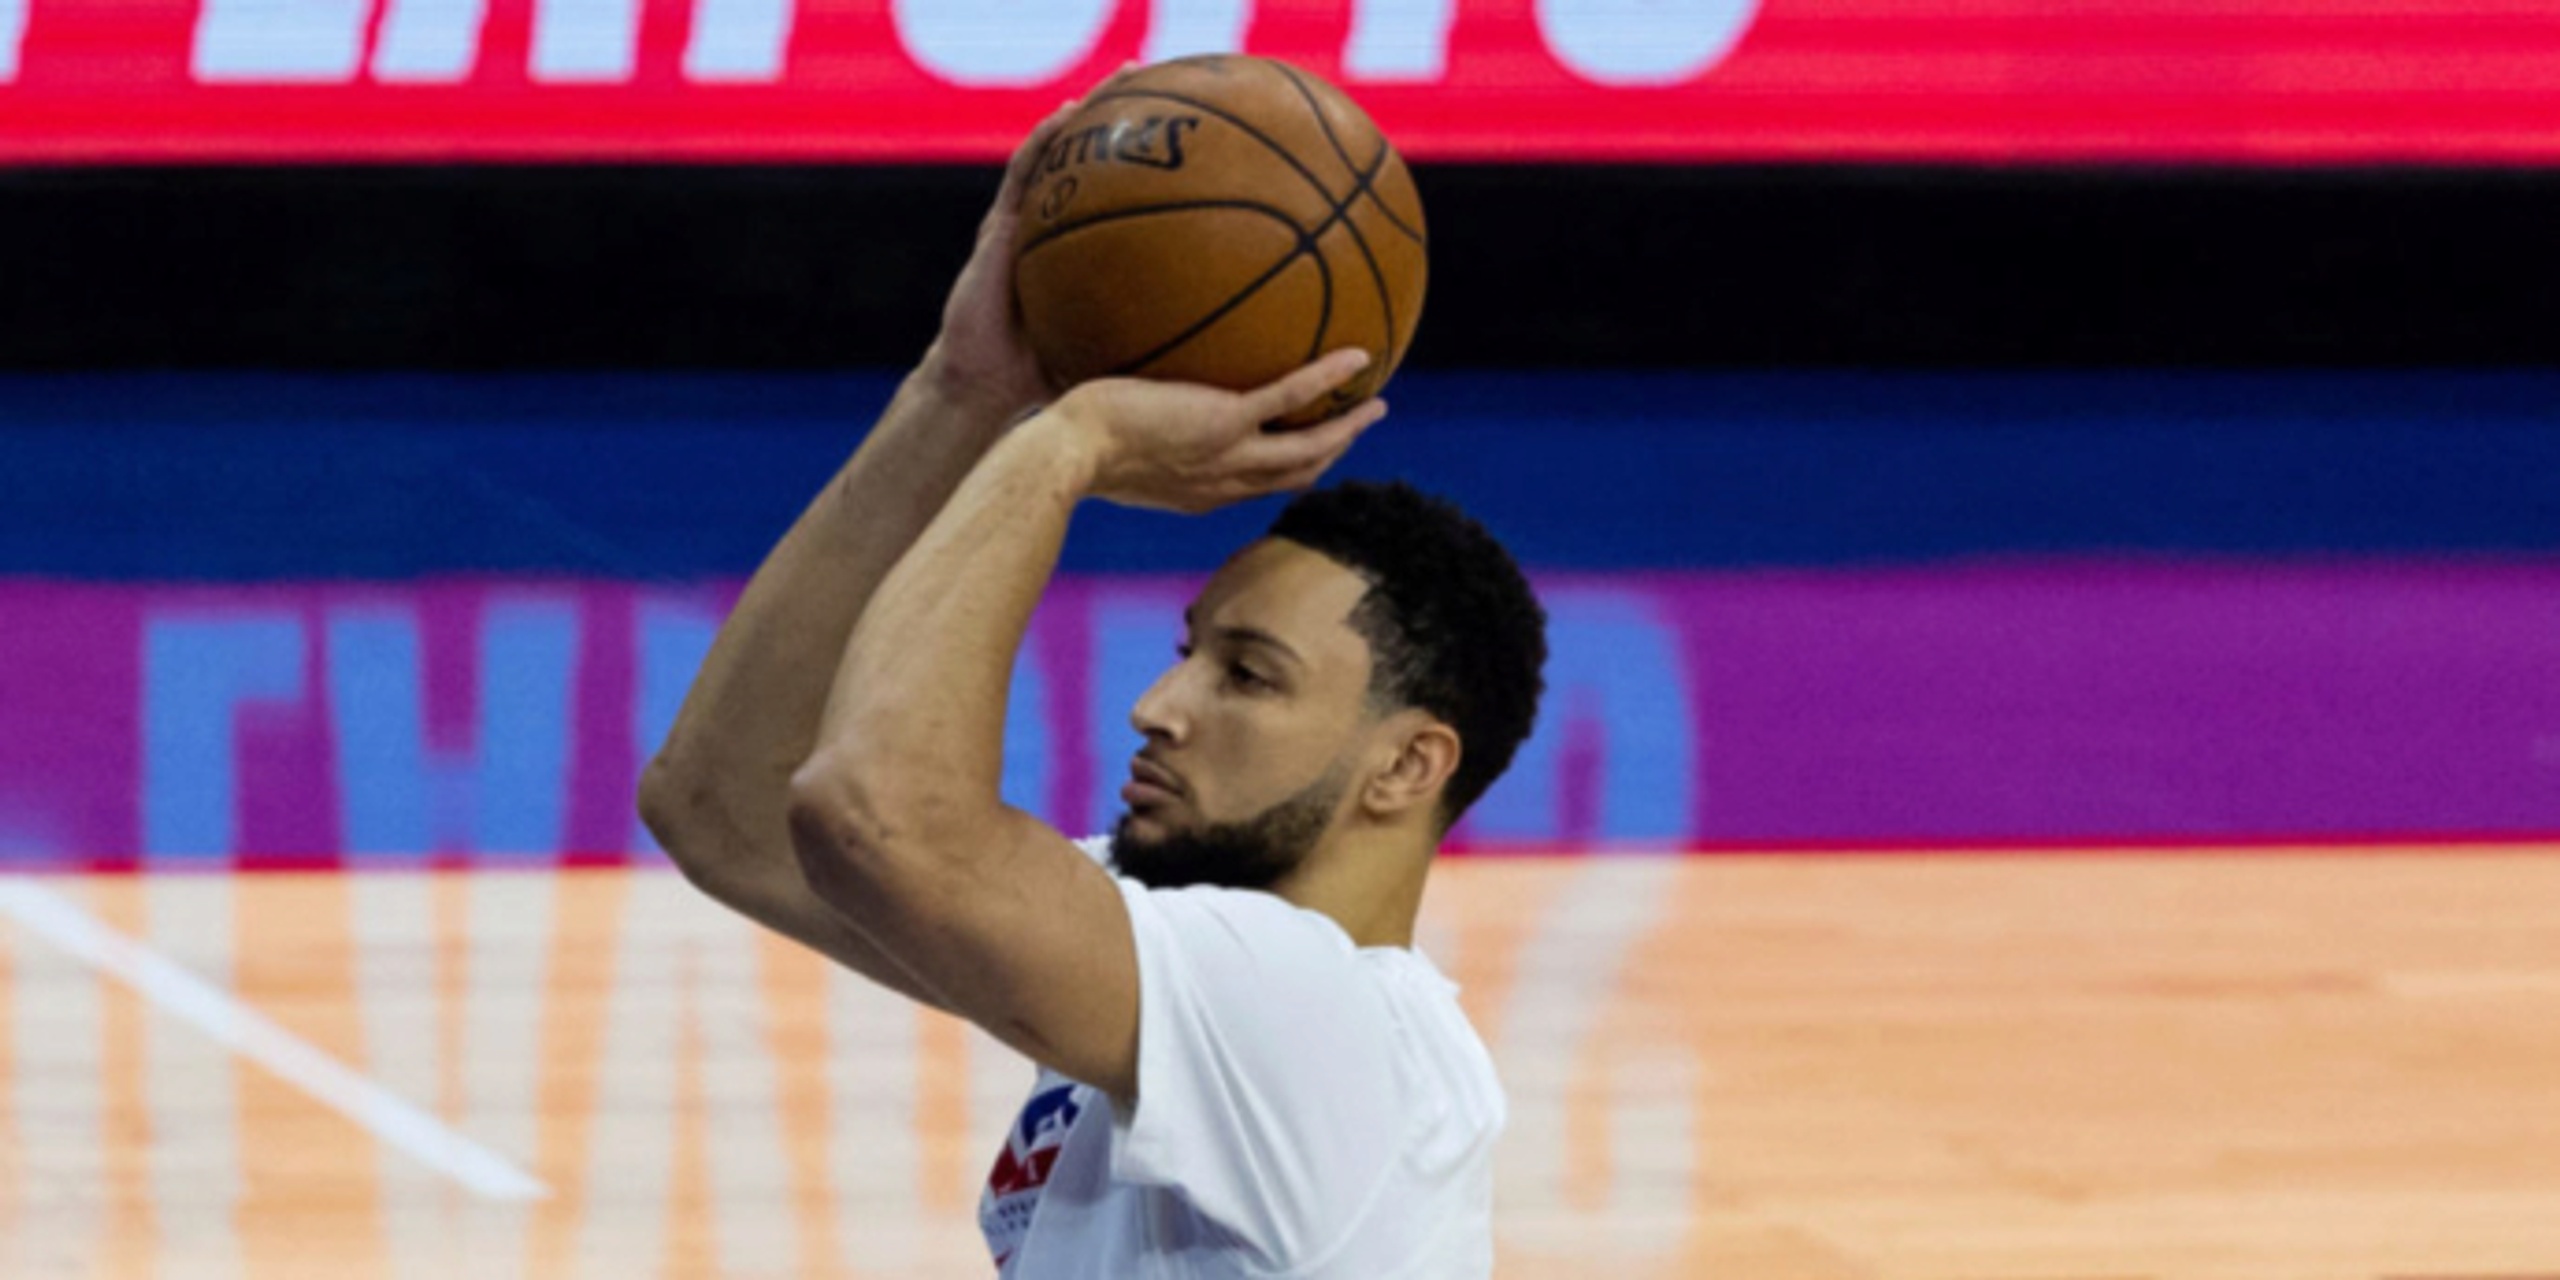 Sixers fine Simmons for missing last game, will continue to